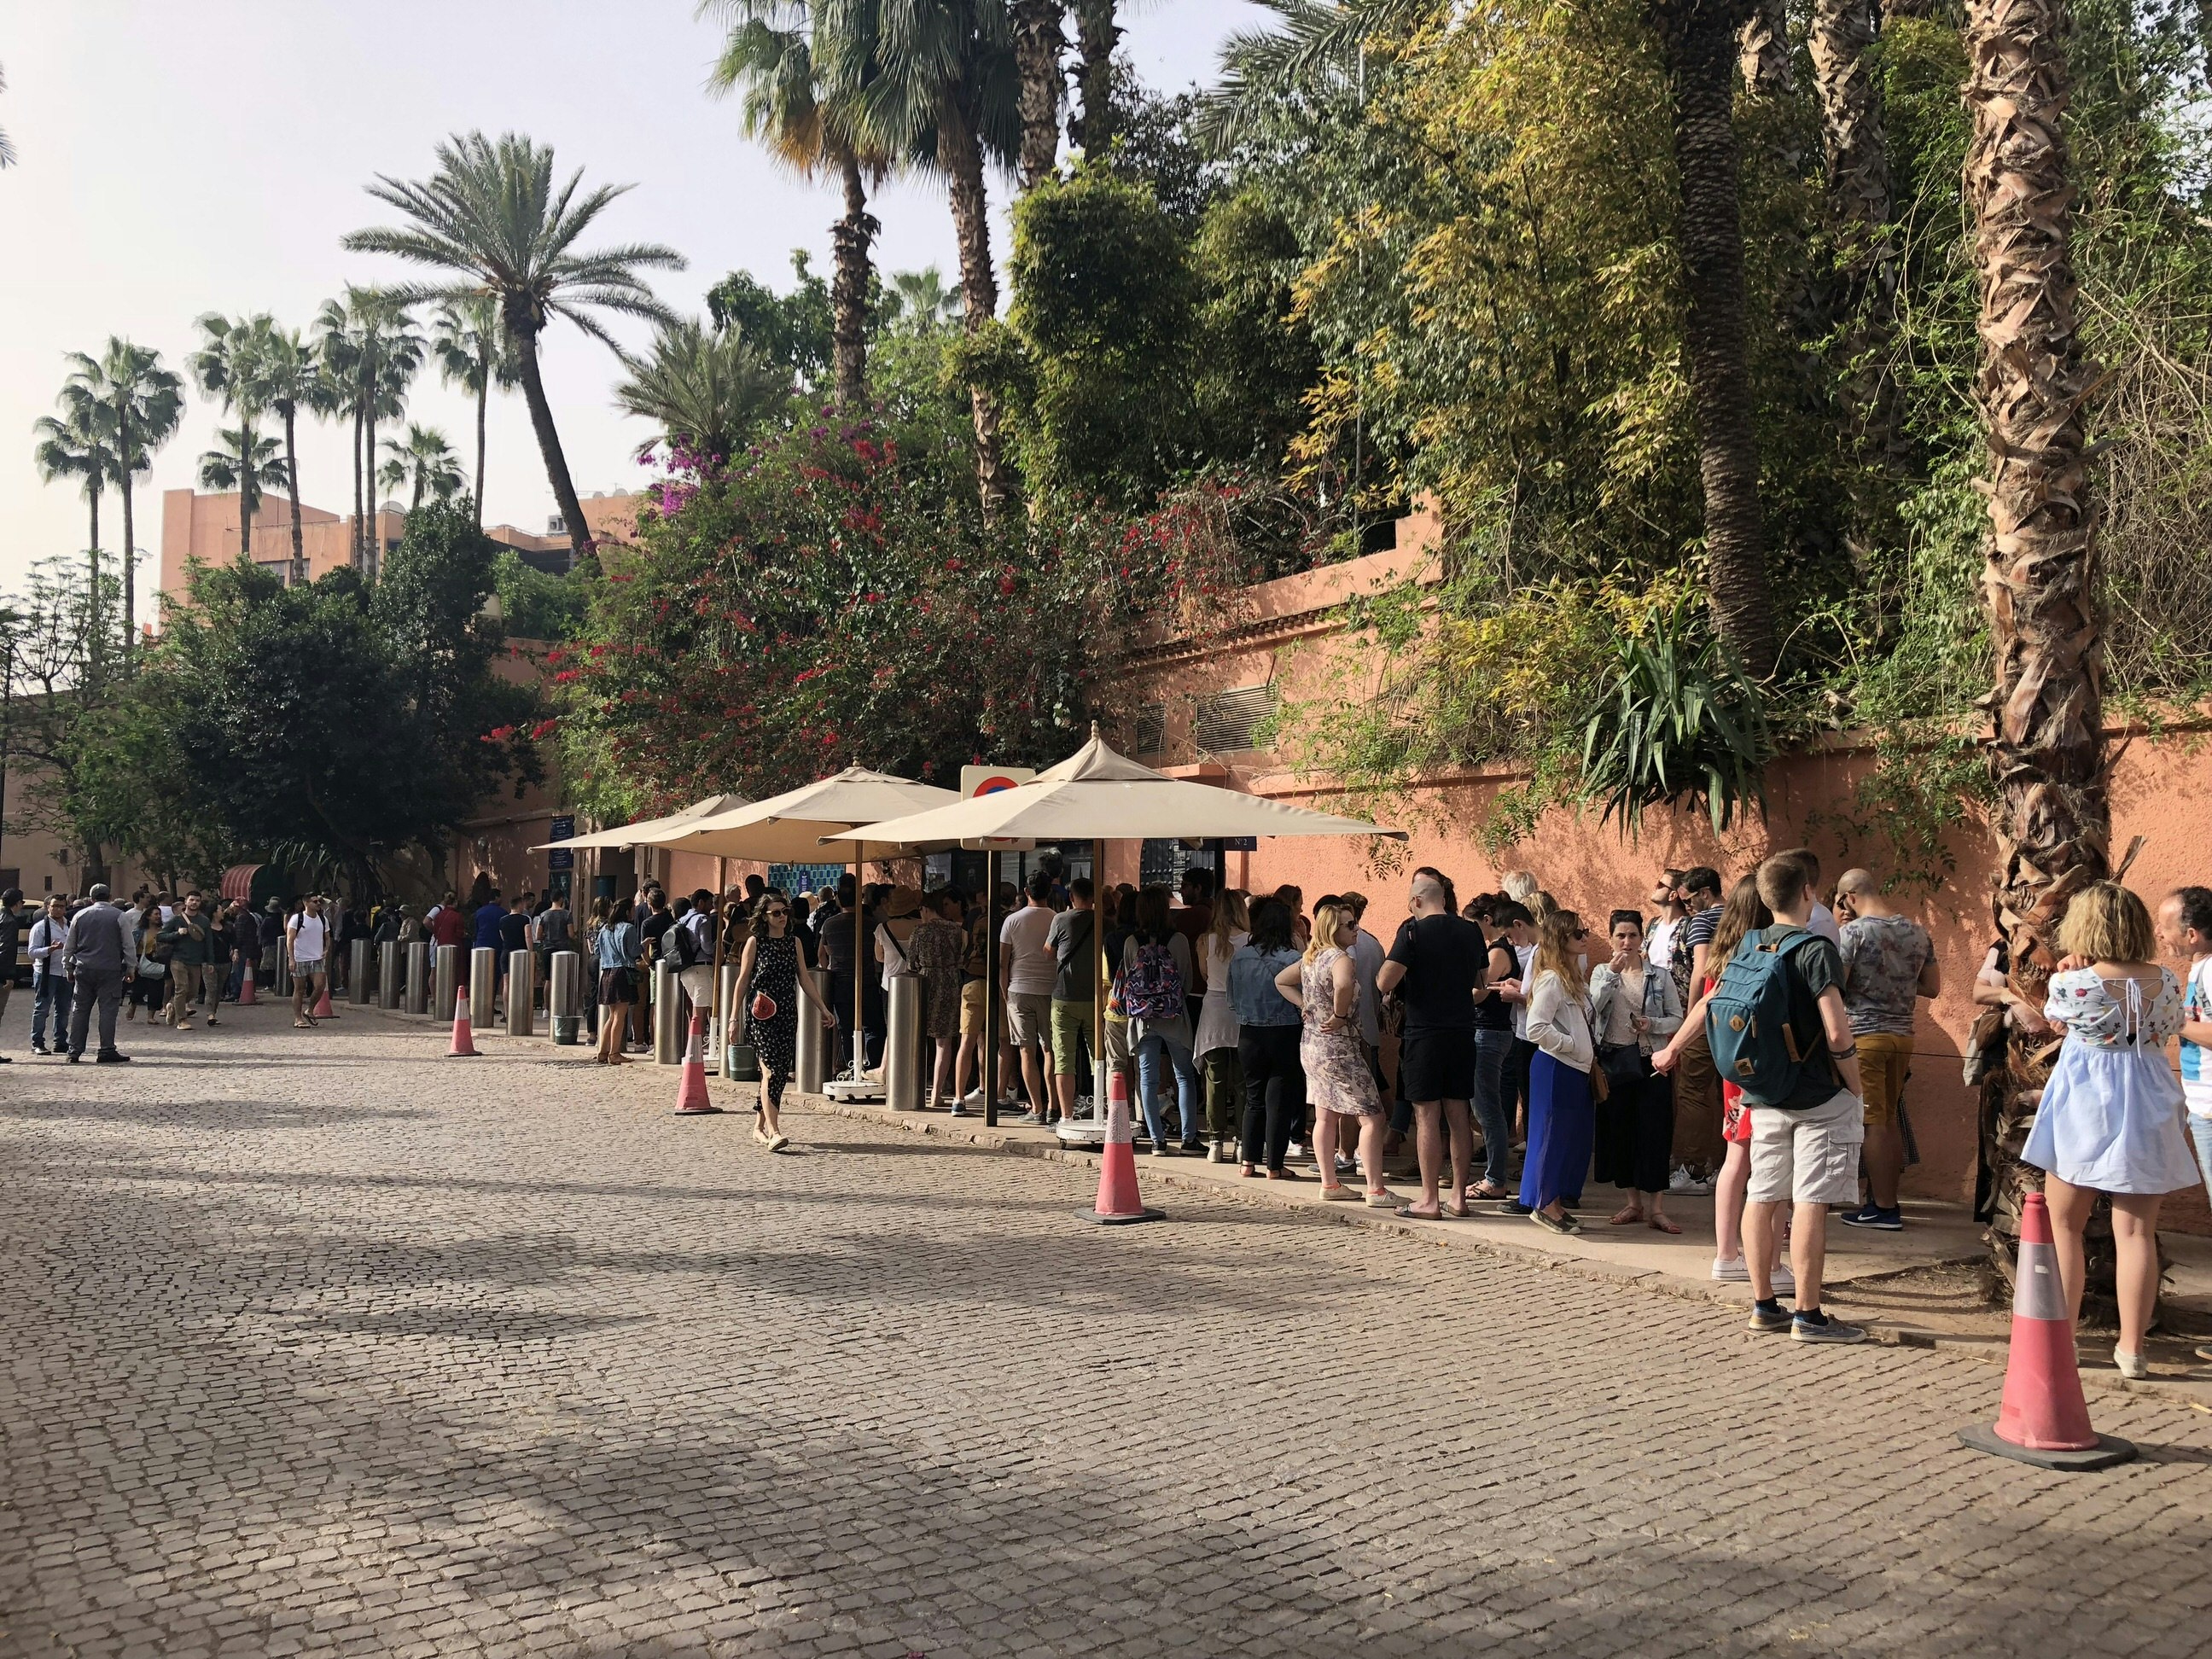 A very long queue with hundreds of people stand along the pavement next to a terracotta-coloured wall; the street in the foreground is cobbles. Palms and flowering bushes tower over the wall.